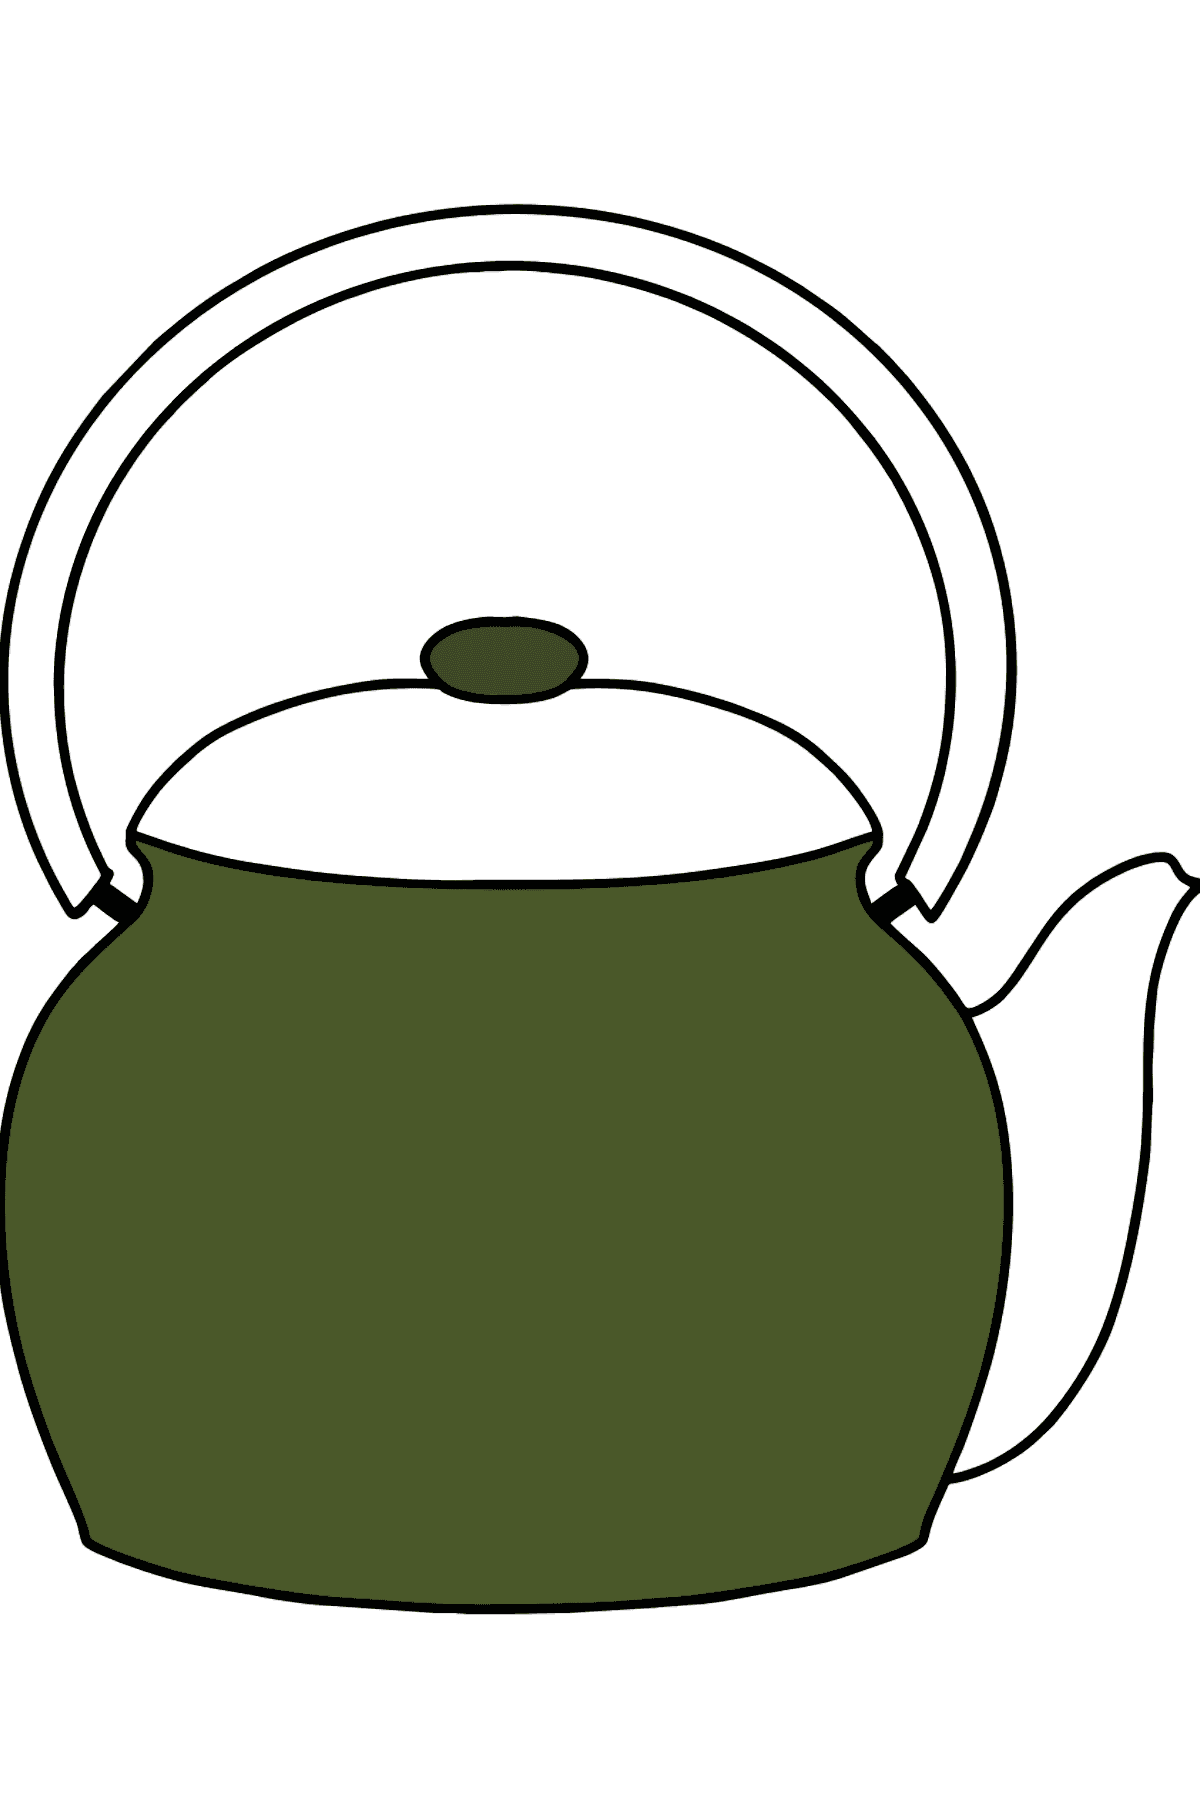 Teapot coloring page - Coloring Pages for Kids